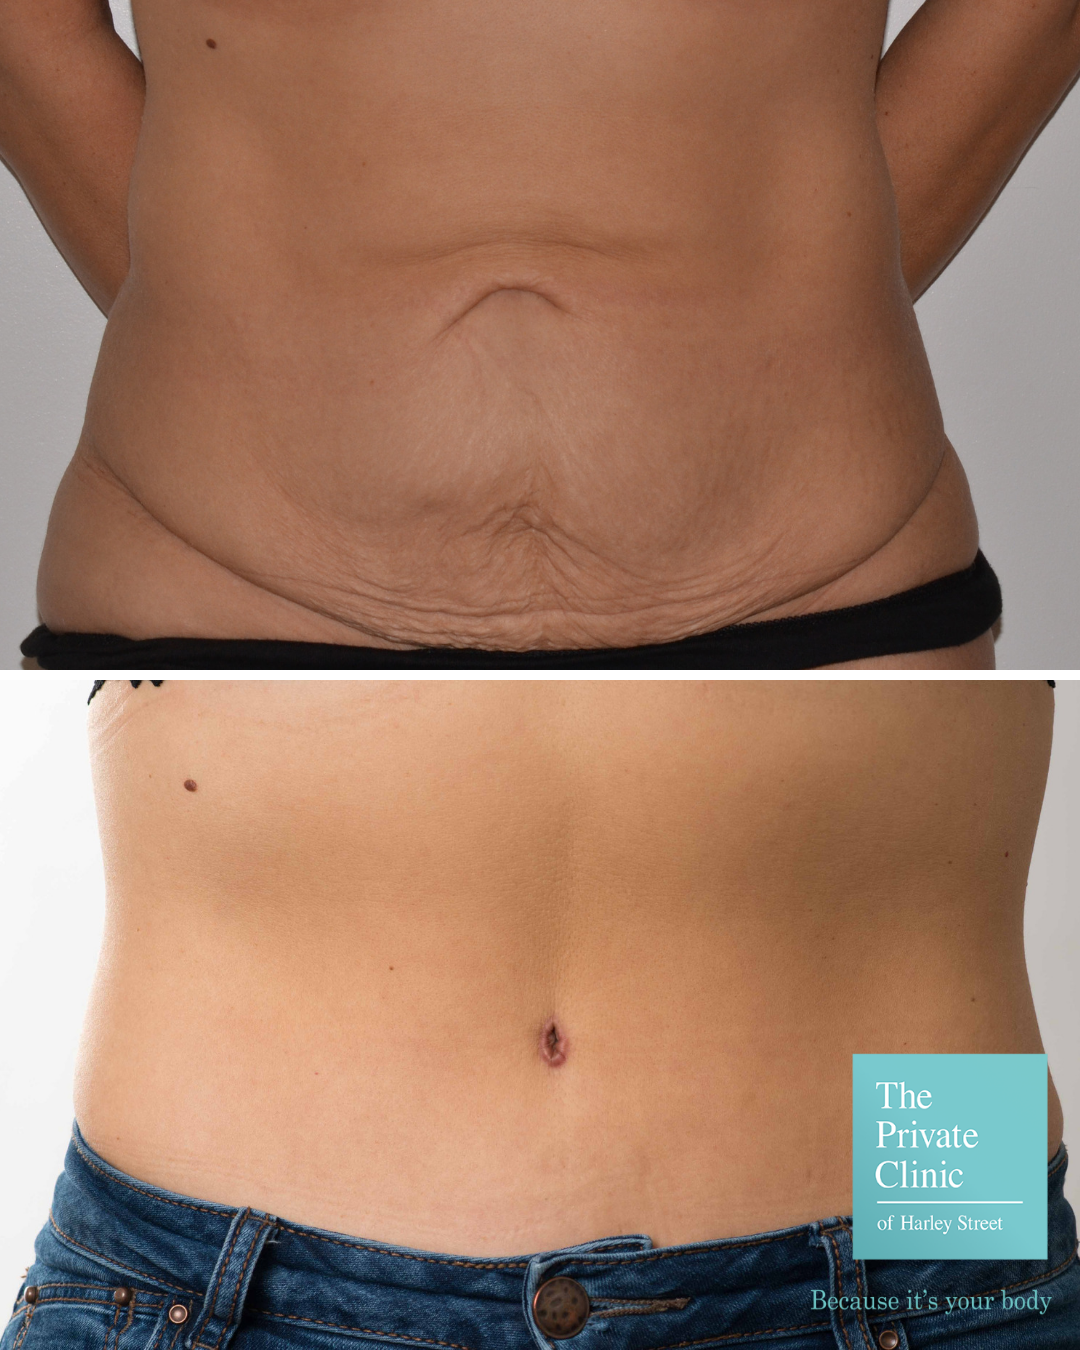 Tummy Tuck Before and After Photos, life after tummy tuck, tummy